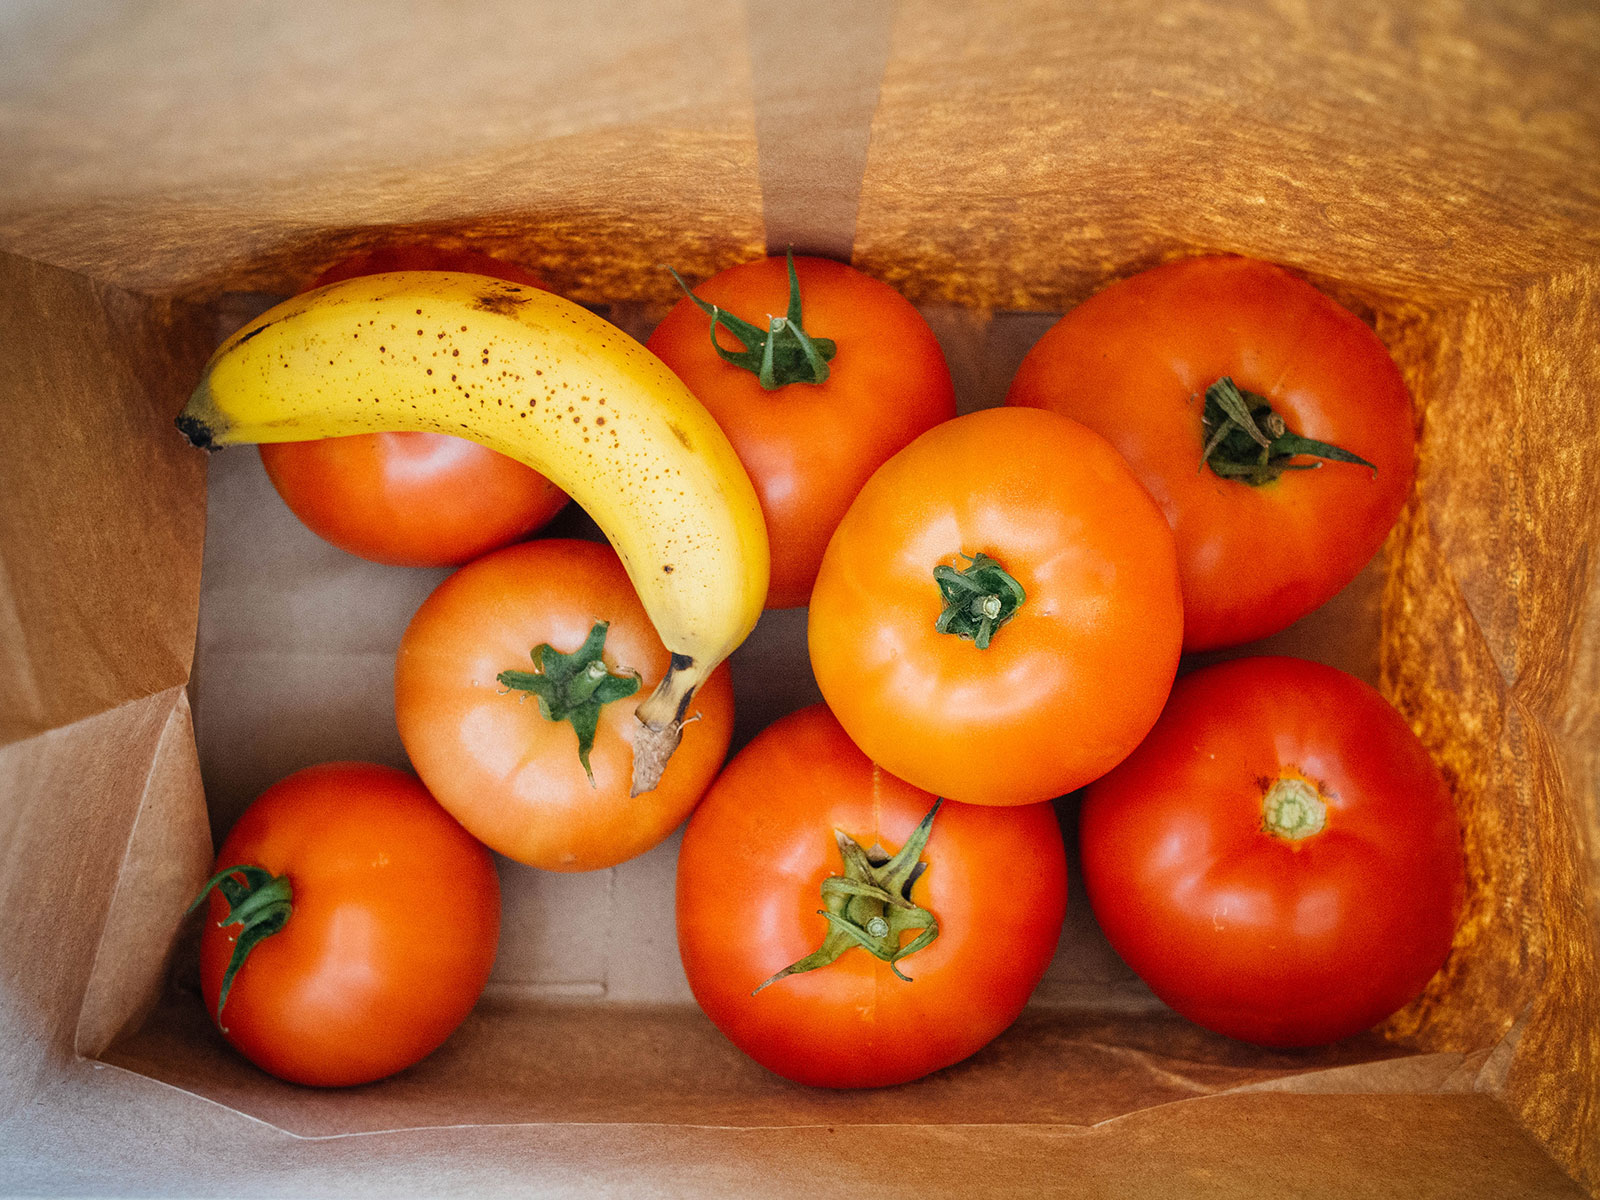 Several beefsteak tomatoes ripening inside a paper bag with a ripe banana